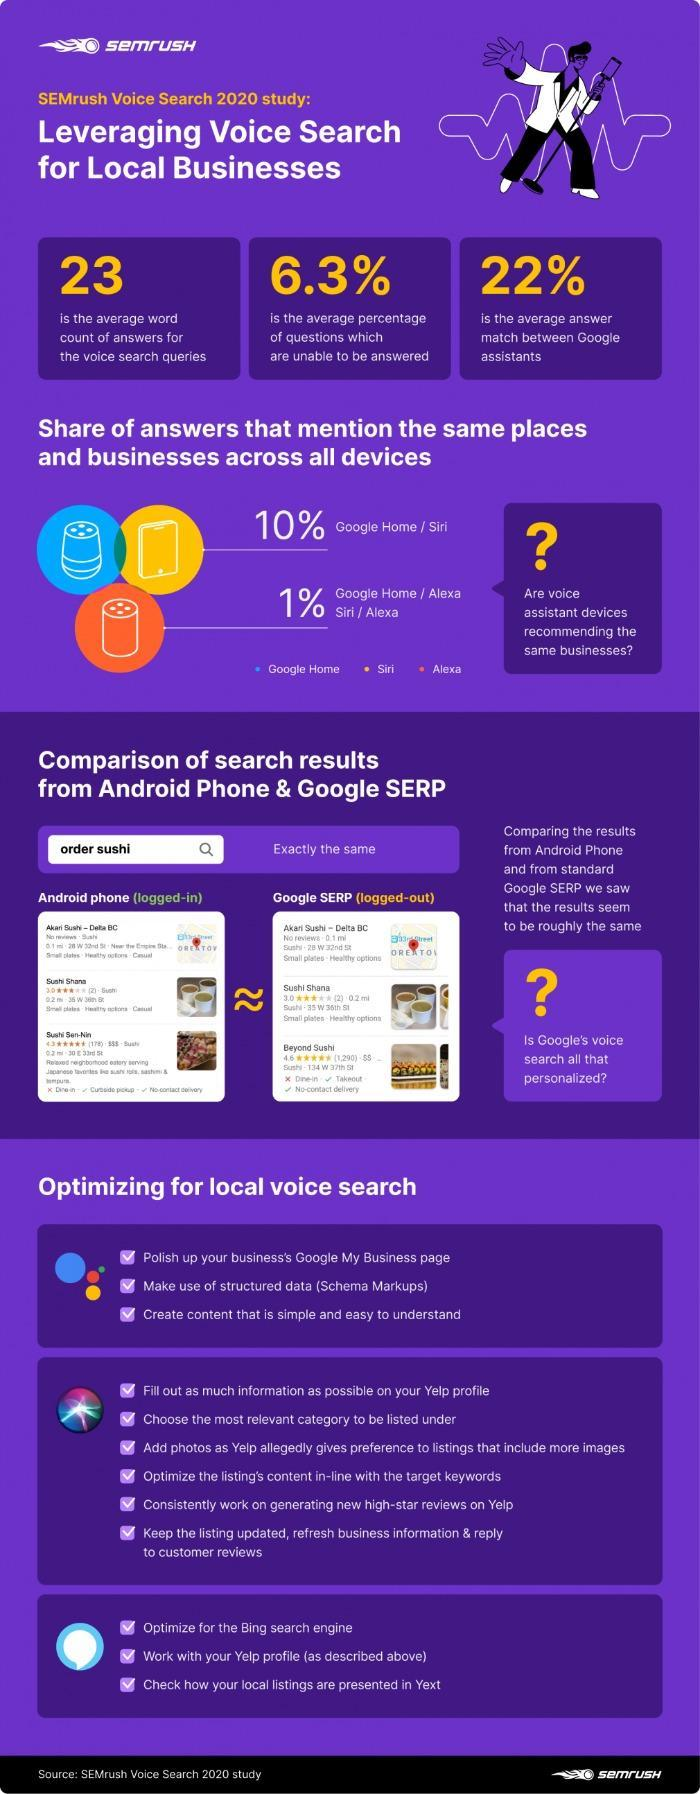 Infographic from SEMrush showing facts about leveraging voice search for local businesses. 